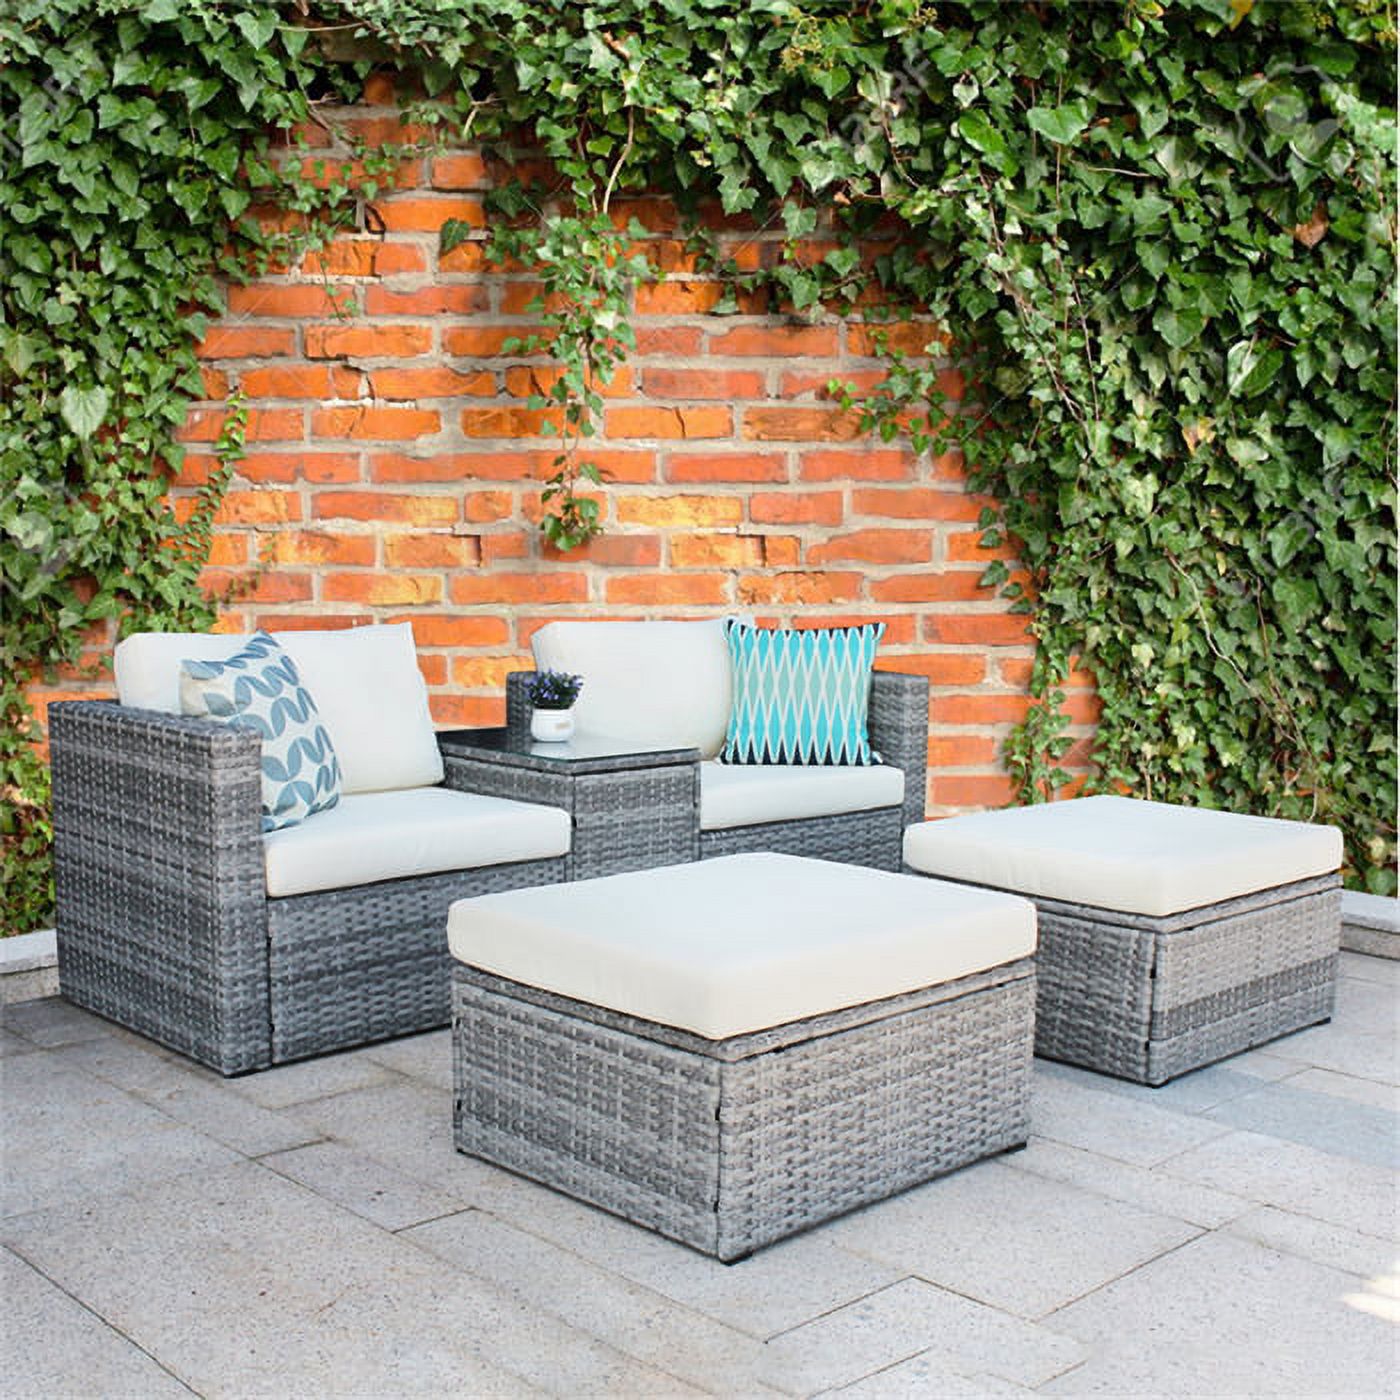 5 Pieces Outdoor Patio Sectional Sofa Set, Gray Rattan and Beige Cushion with Weather Protecting Cover, Patio Sofa Sets with 2 Rattan Chairs, 2 Pieces Patio Rattan Ottomans and Coffee Table - image 1 of 7